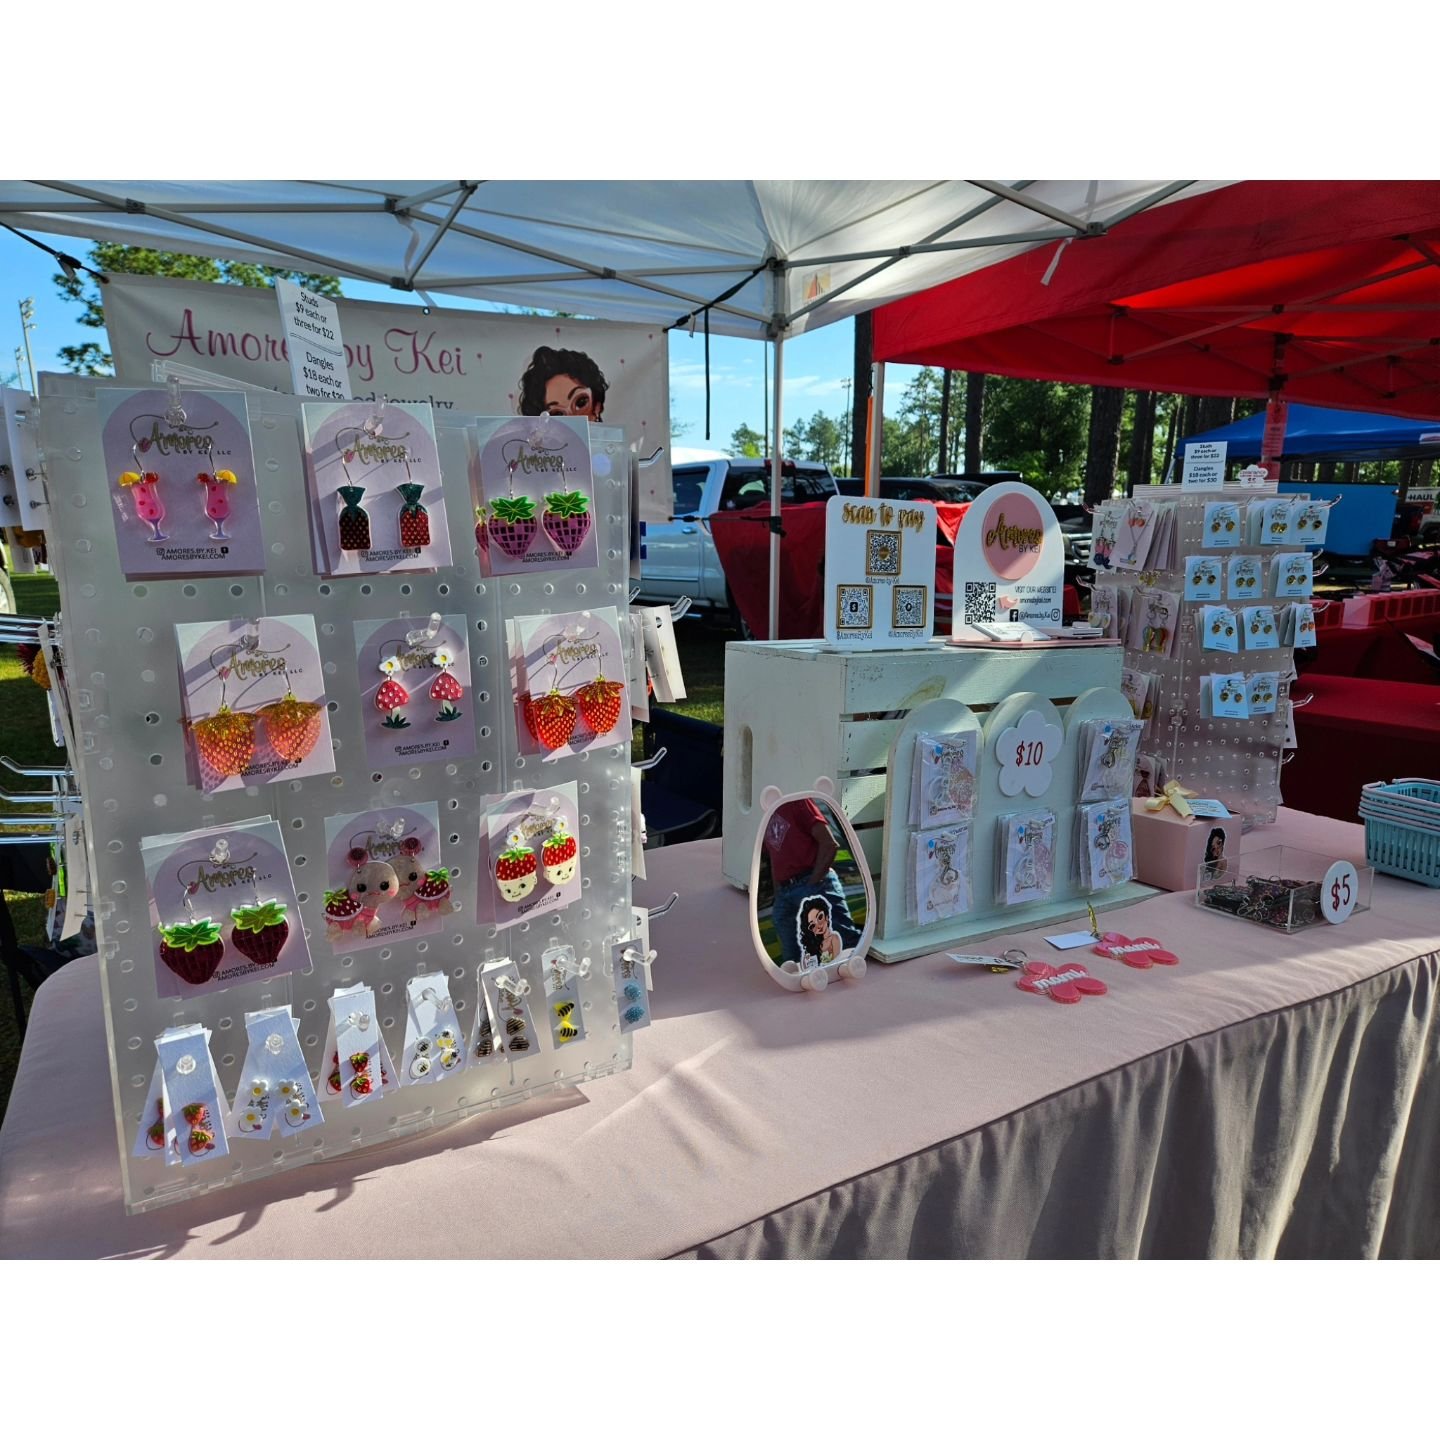 Looking forward to another great day at the Strawberry Festival today. We are open 9am-5pm and the strawberry earrings have been restocked 🙌🍓

Come say hi!